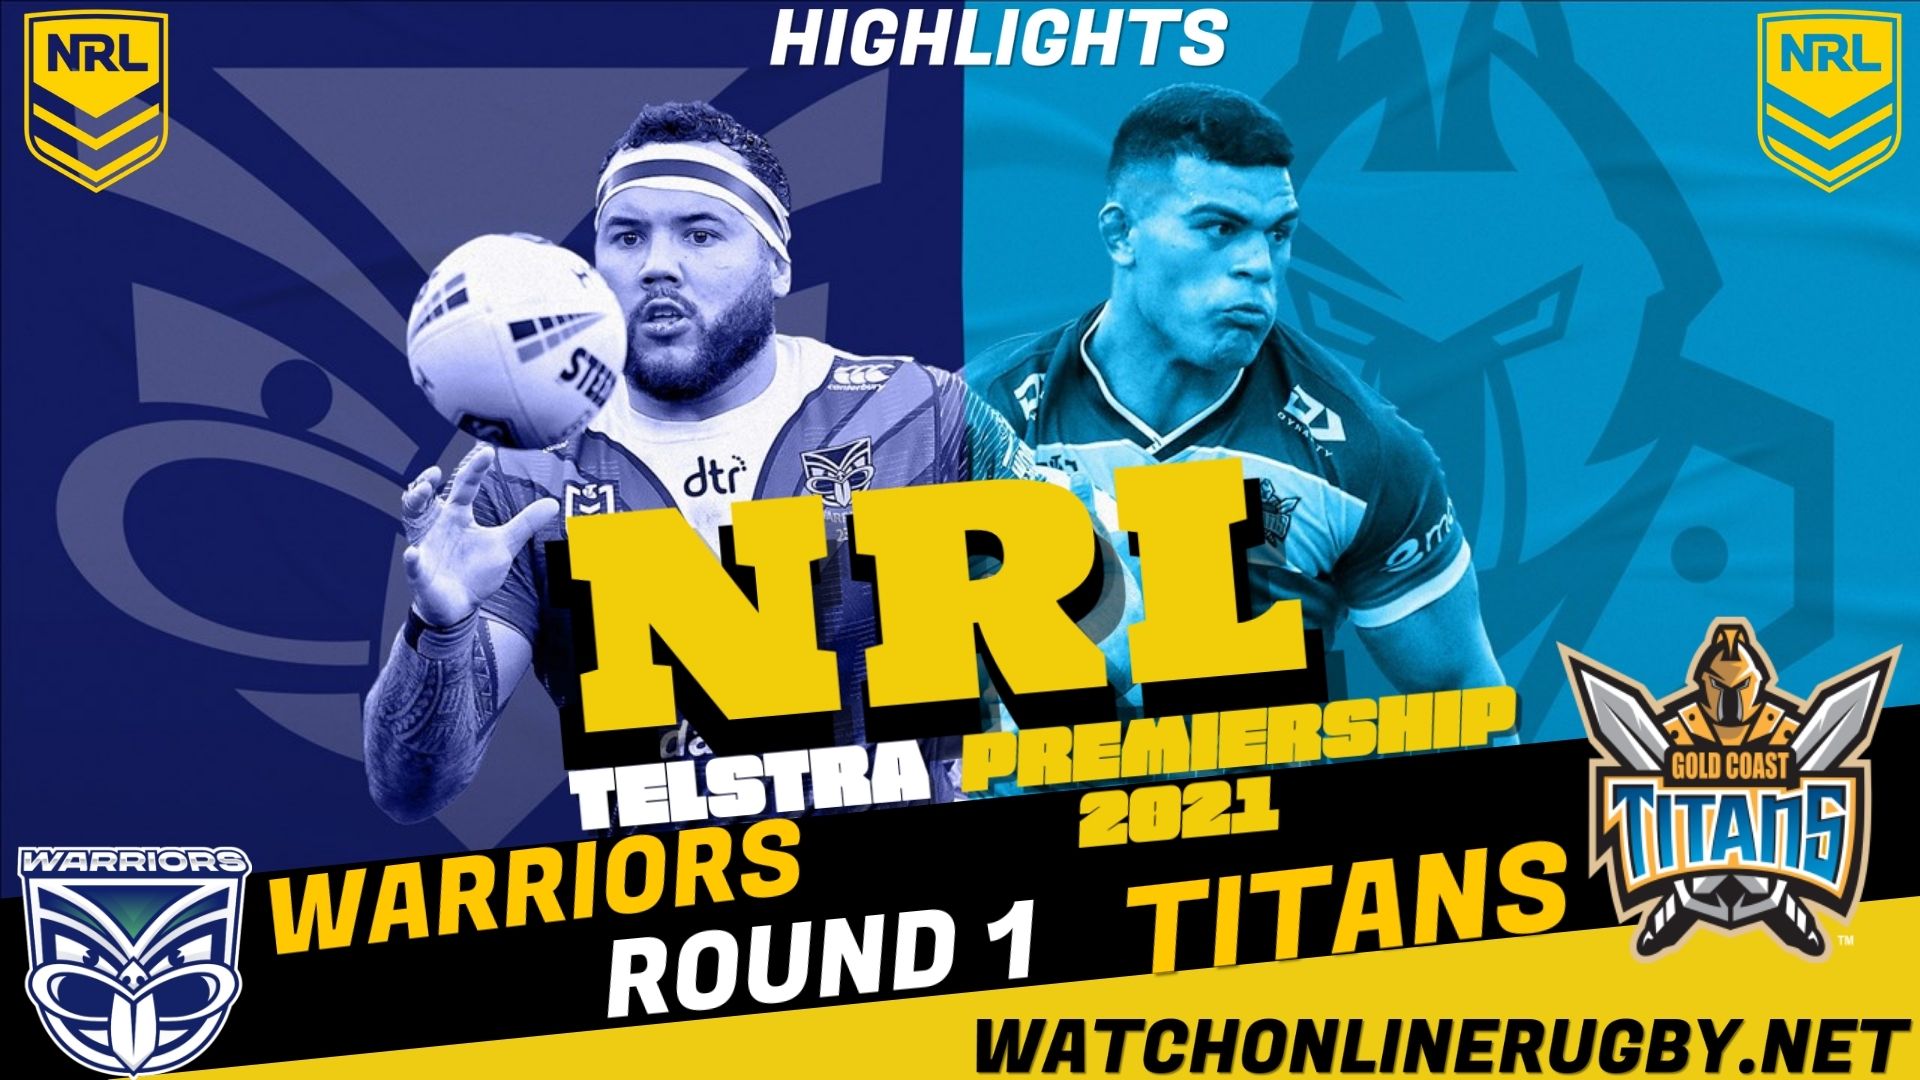 Warriors Vs Titans Highlights RD 1 NRL Rugby